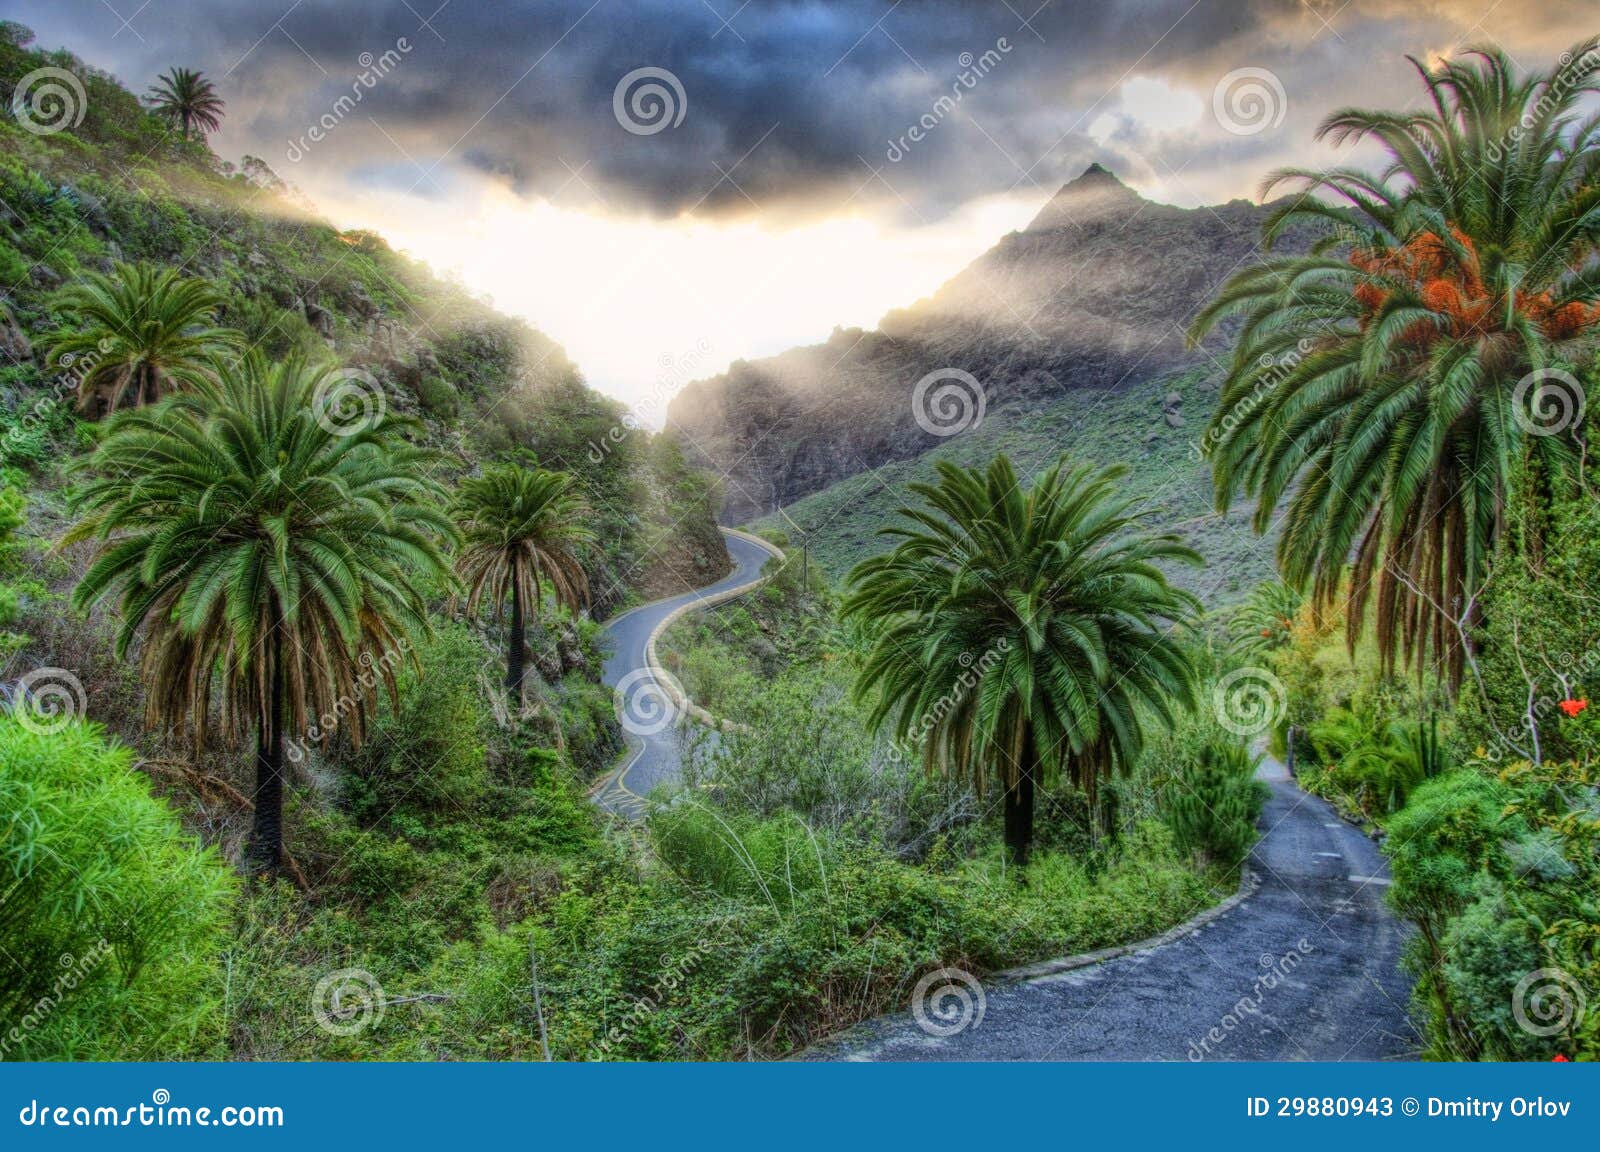 palms and serpentine near masca village with mountains, tenerife, canarian islands